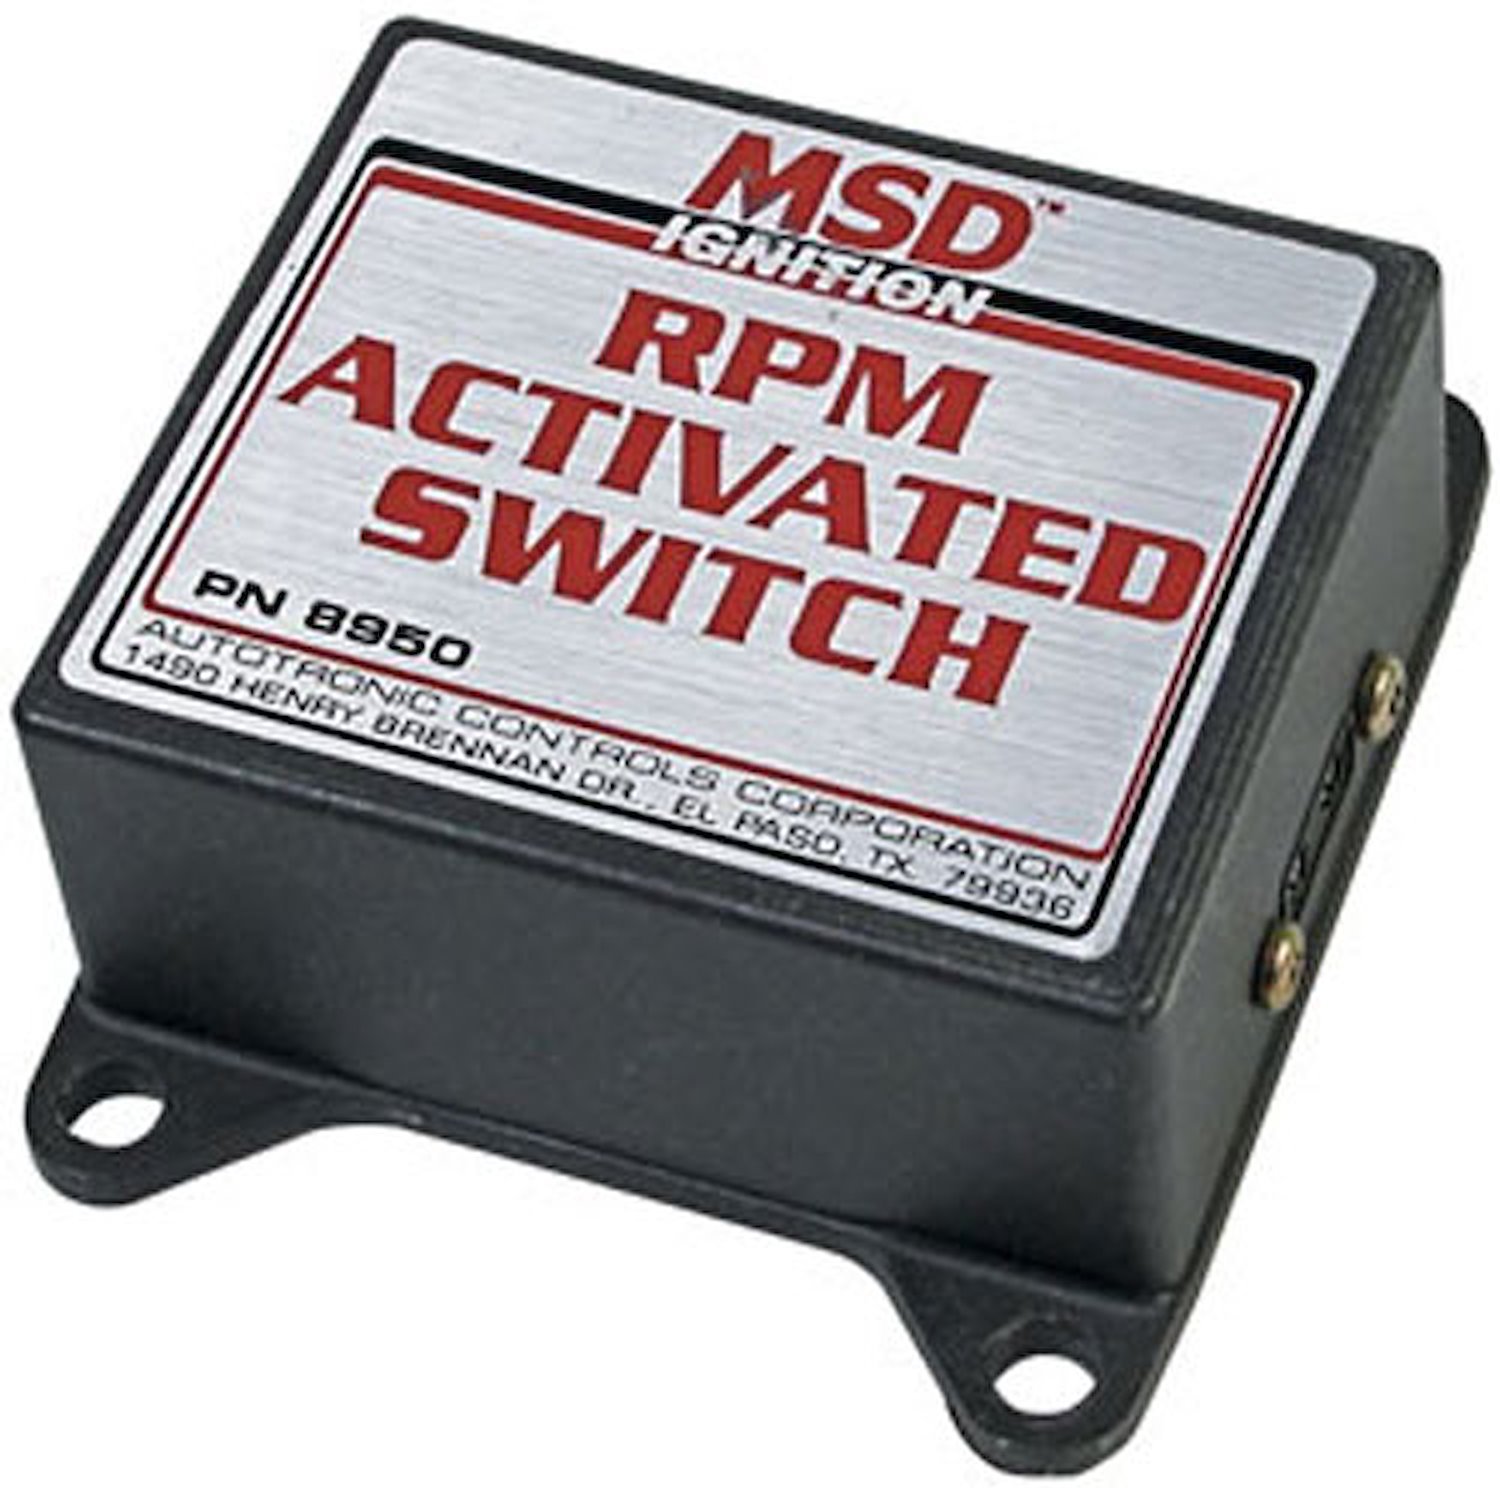 RPM Activated Switch Up to 1.5 amps Includes